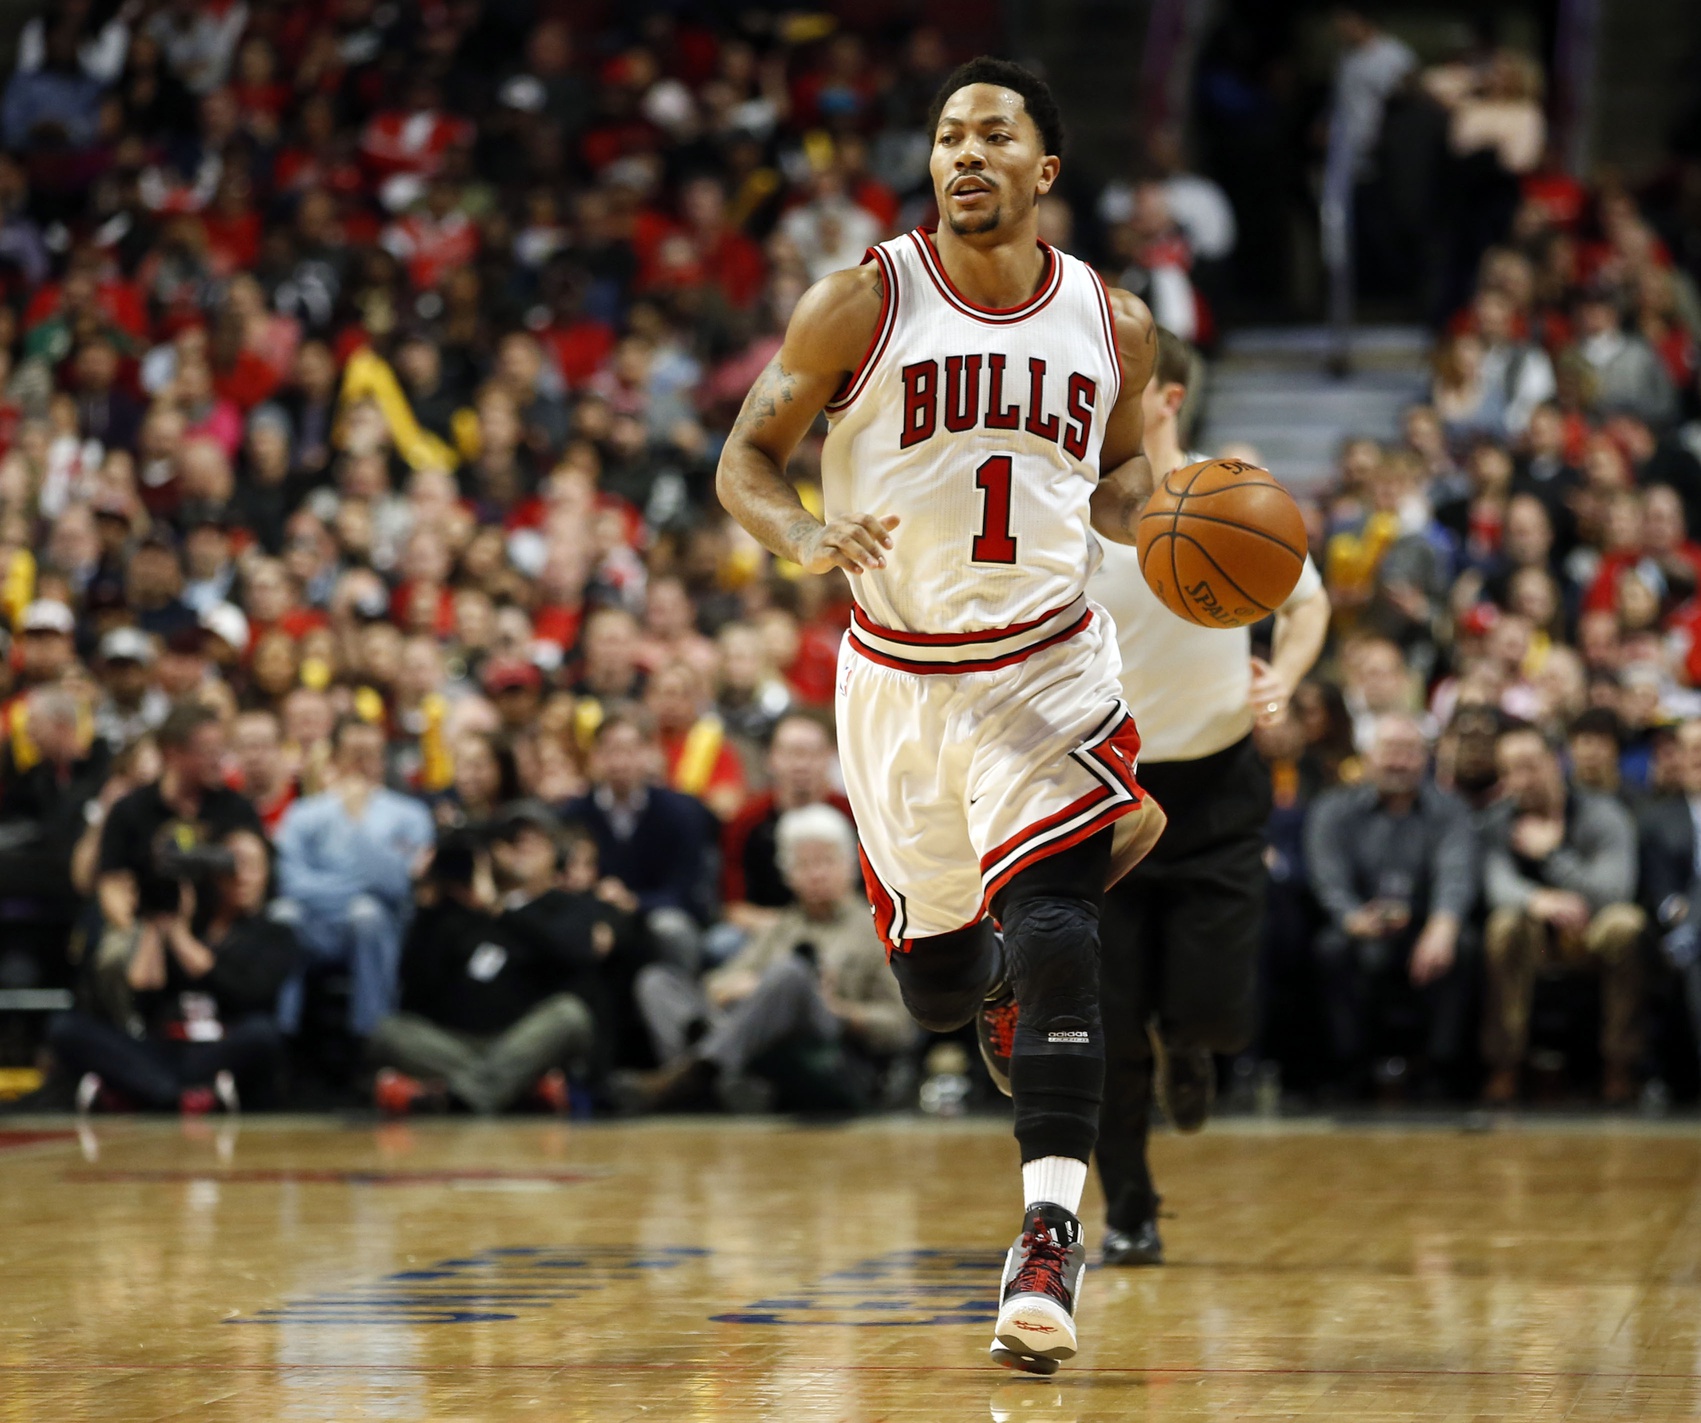 Derrick Rose A Possible Reunion in Chicago?